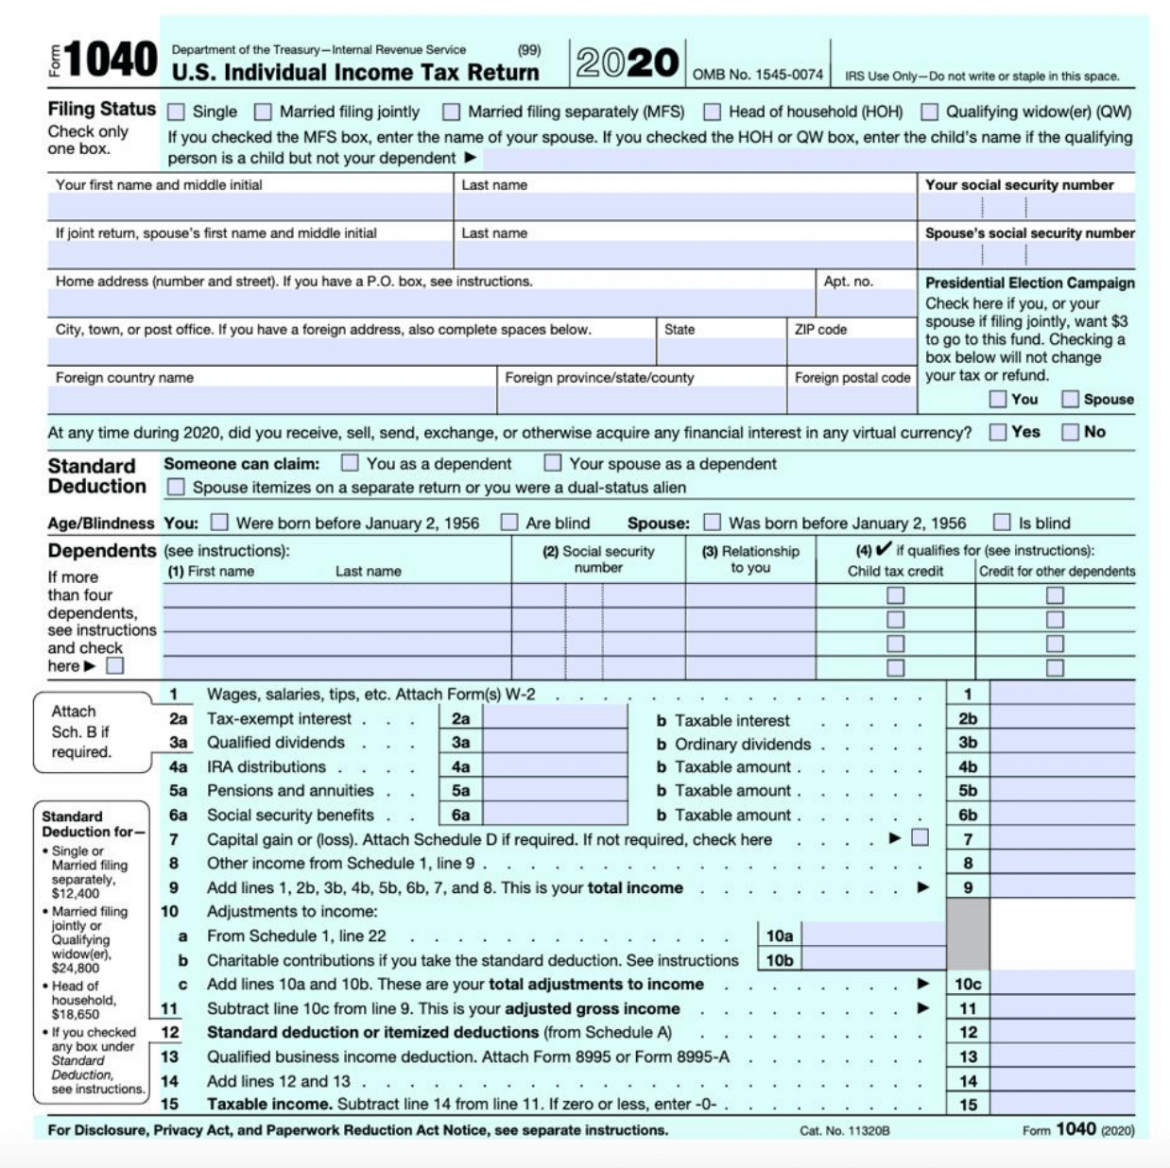 IRS Releases Form 1040 For 2020 Tax Year | Taxgirl